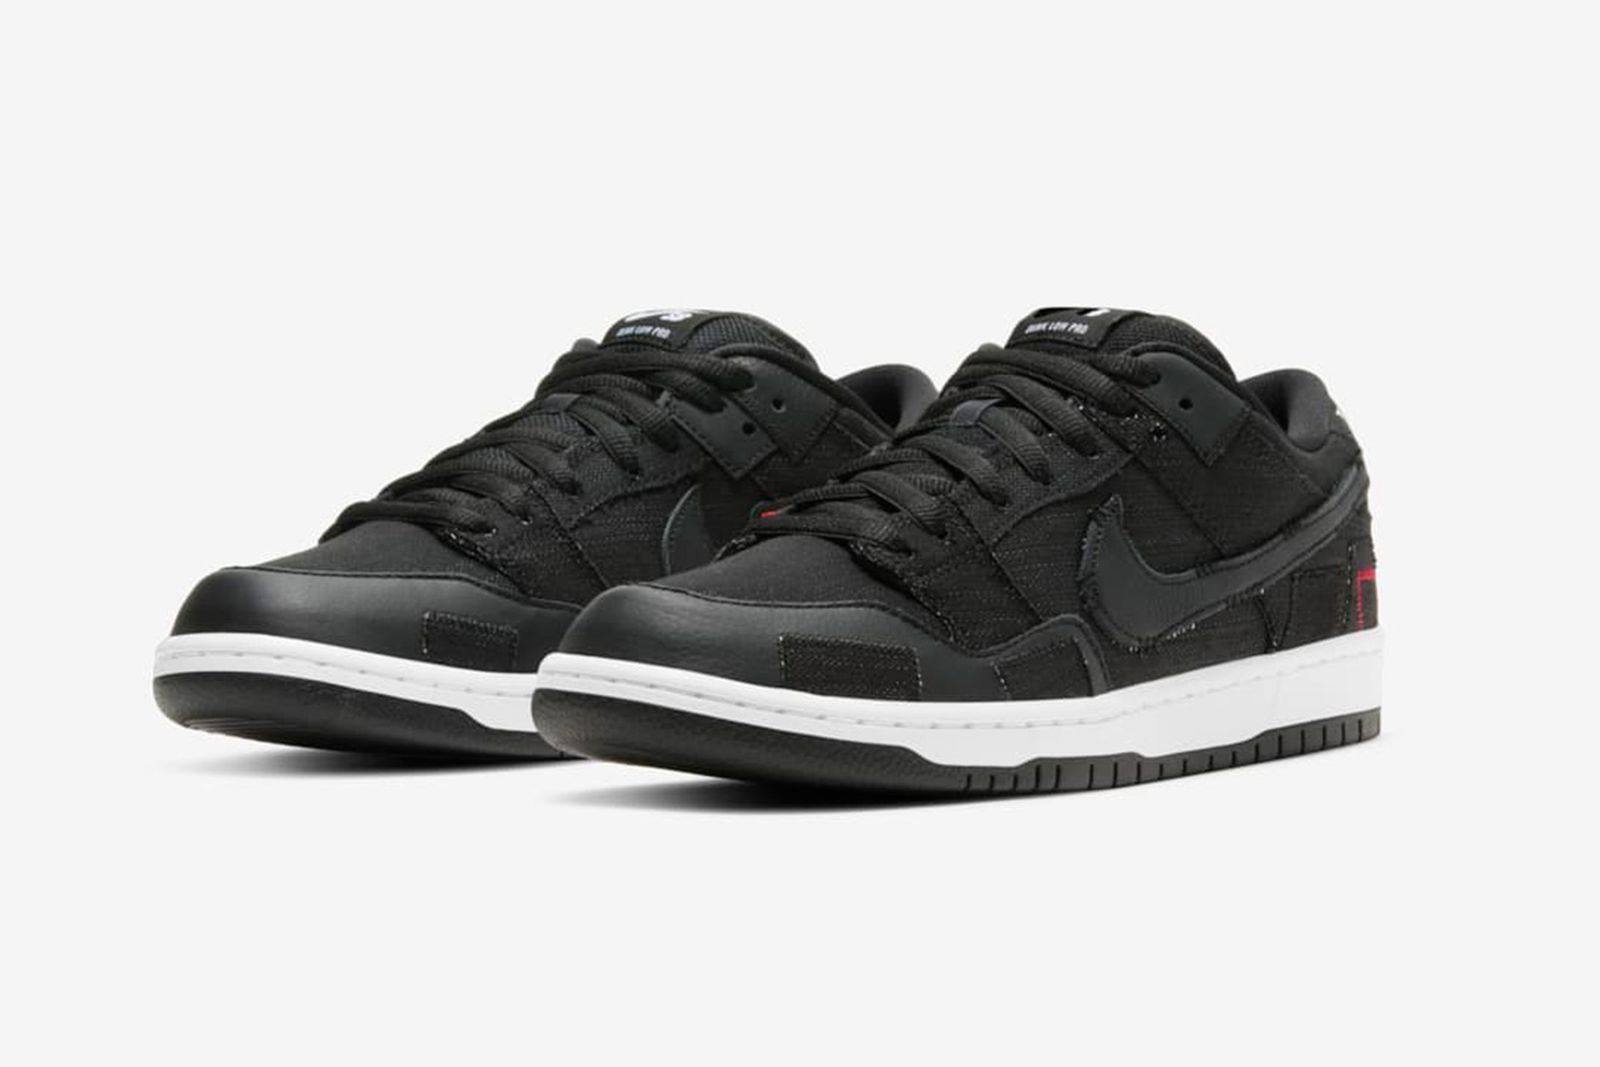 verdy-nike-sb-dunk-low-wasted-youth-release-date-price-07